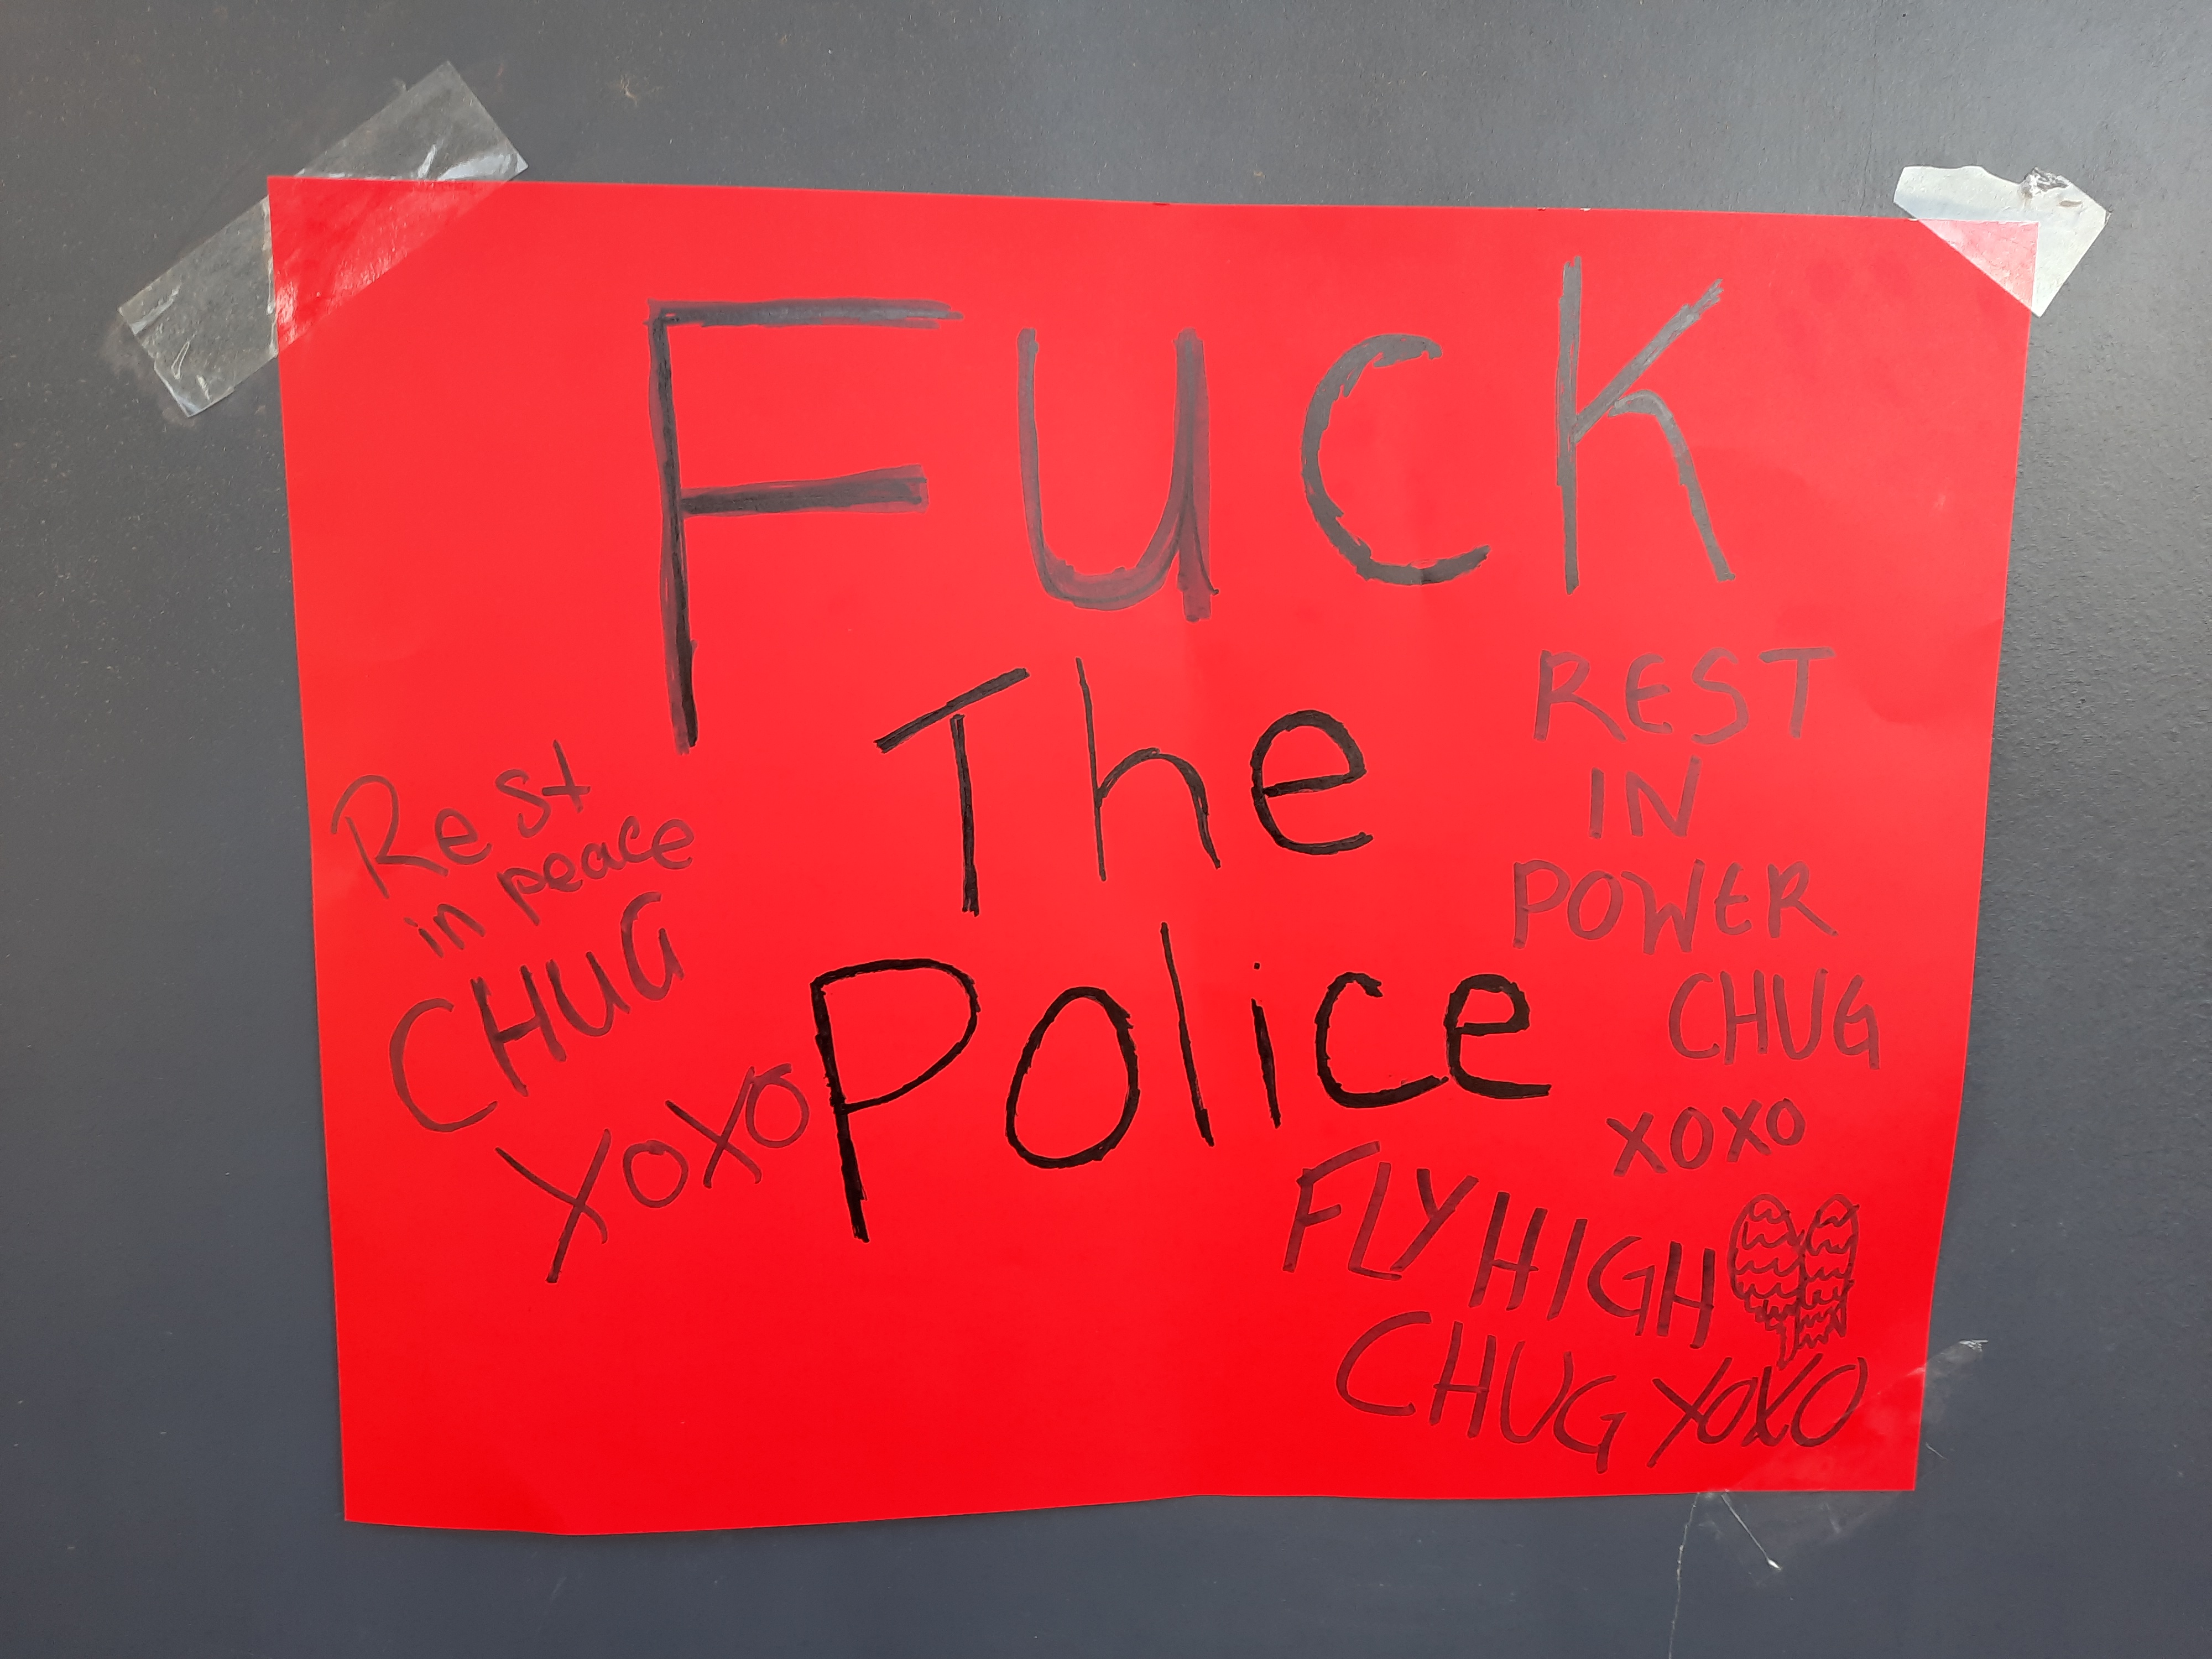 Poster saying Fuck the Police. Rest in Power. Fly high Chug.